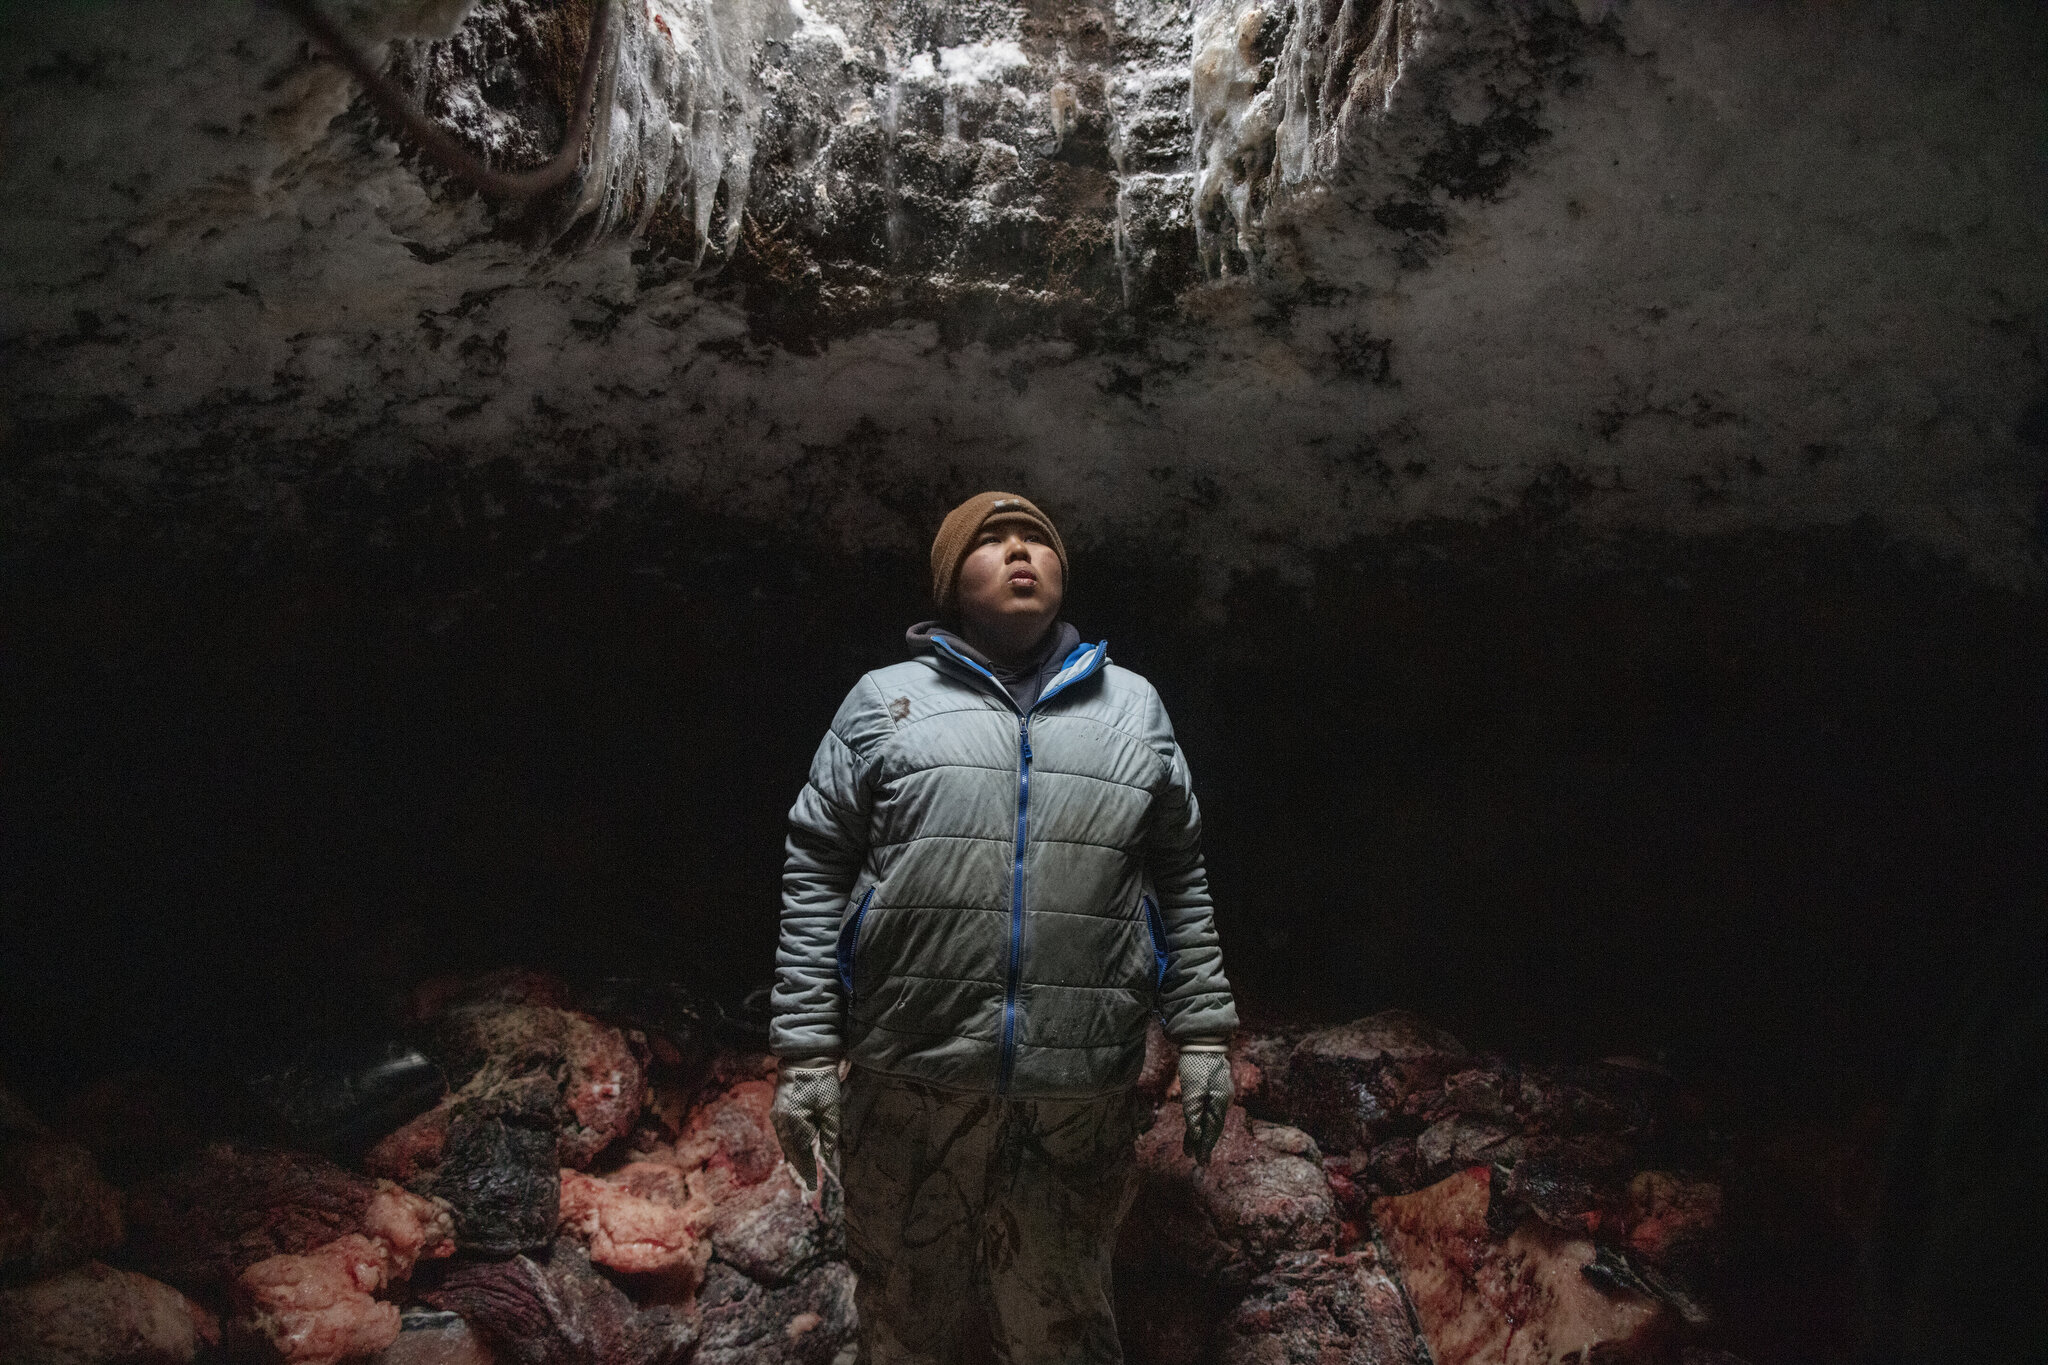  After a successful hunt, Josiah Olemaun, a young whaling crew member takes a break from moving and stacking whale meat into his family’s ice cellar in Utqiagvik, Alaska. April 29th, 2018. Ice cellars are generations-old massive underground freezers 